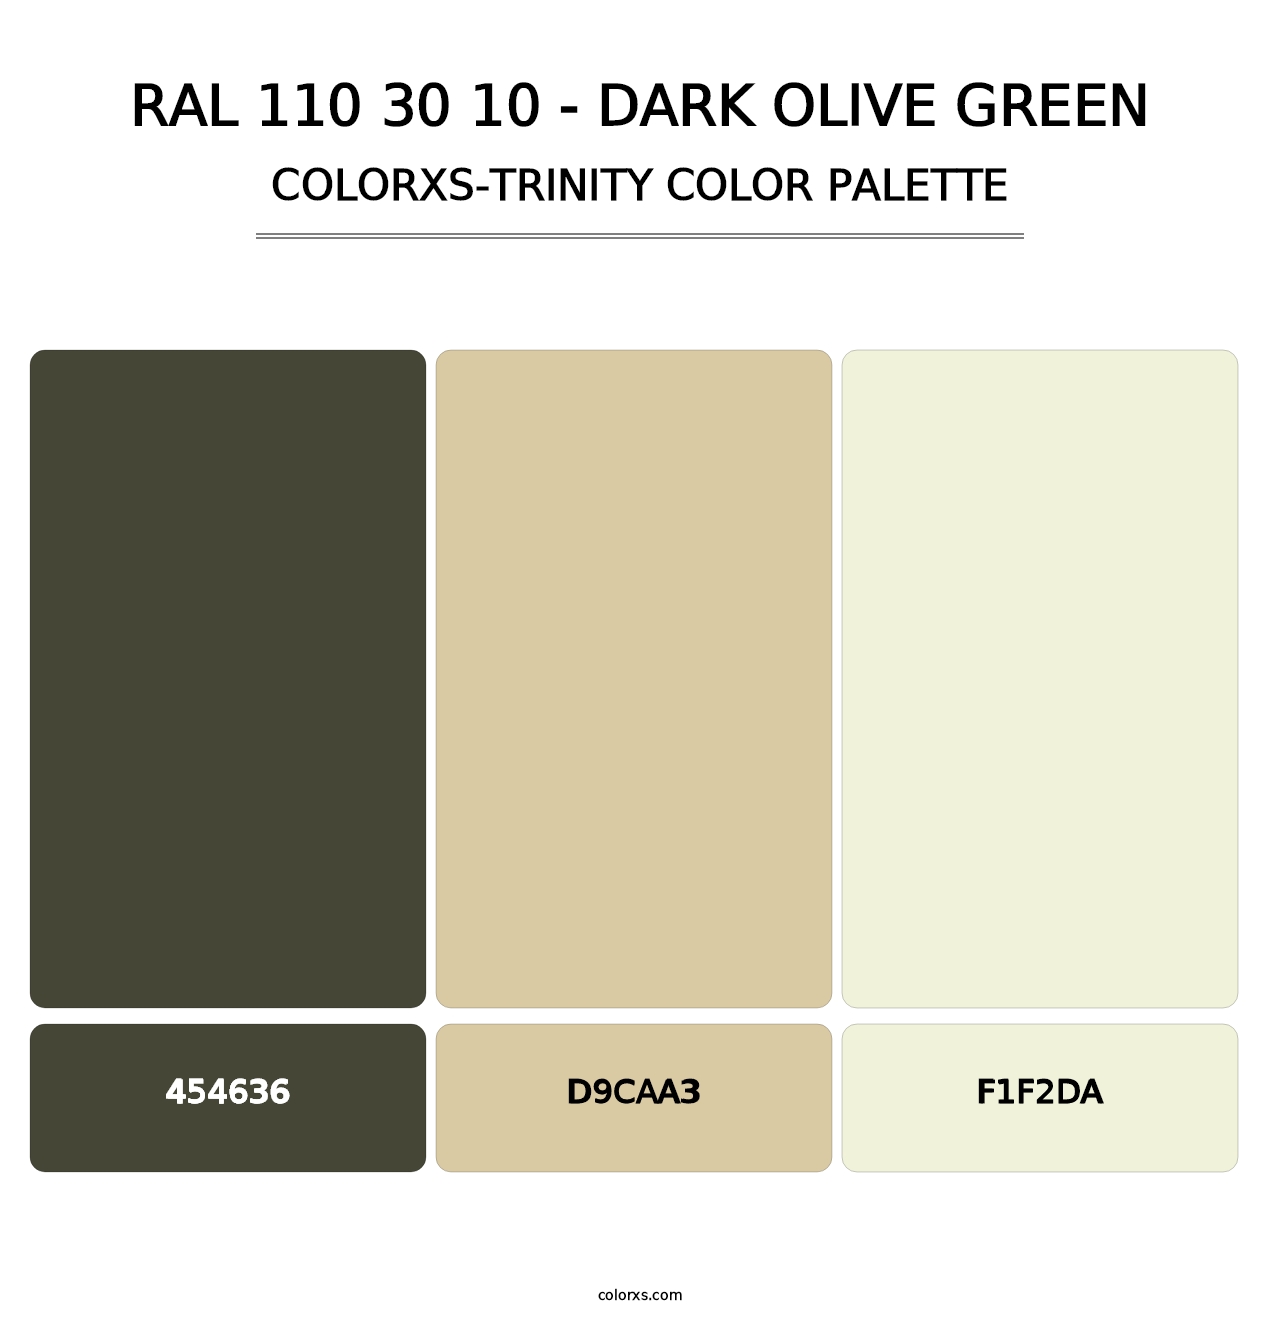 RAL 110 30 10 - Dark Olive Green - Colorxs Trinity Palette